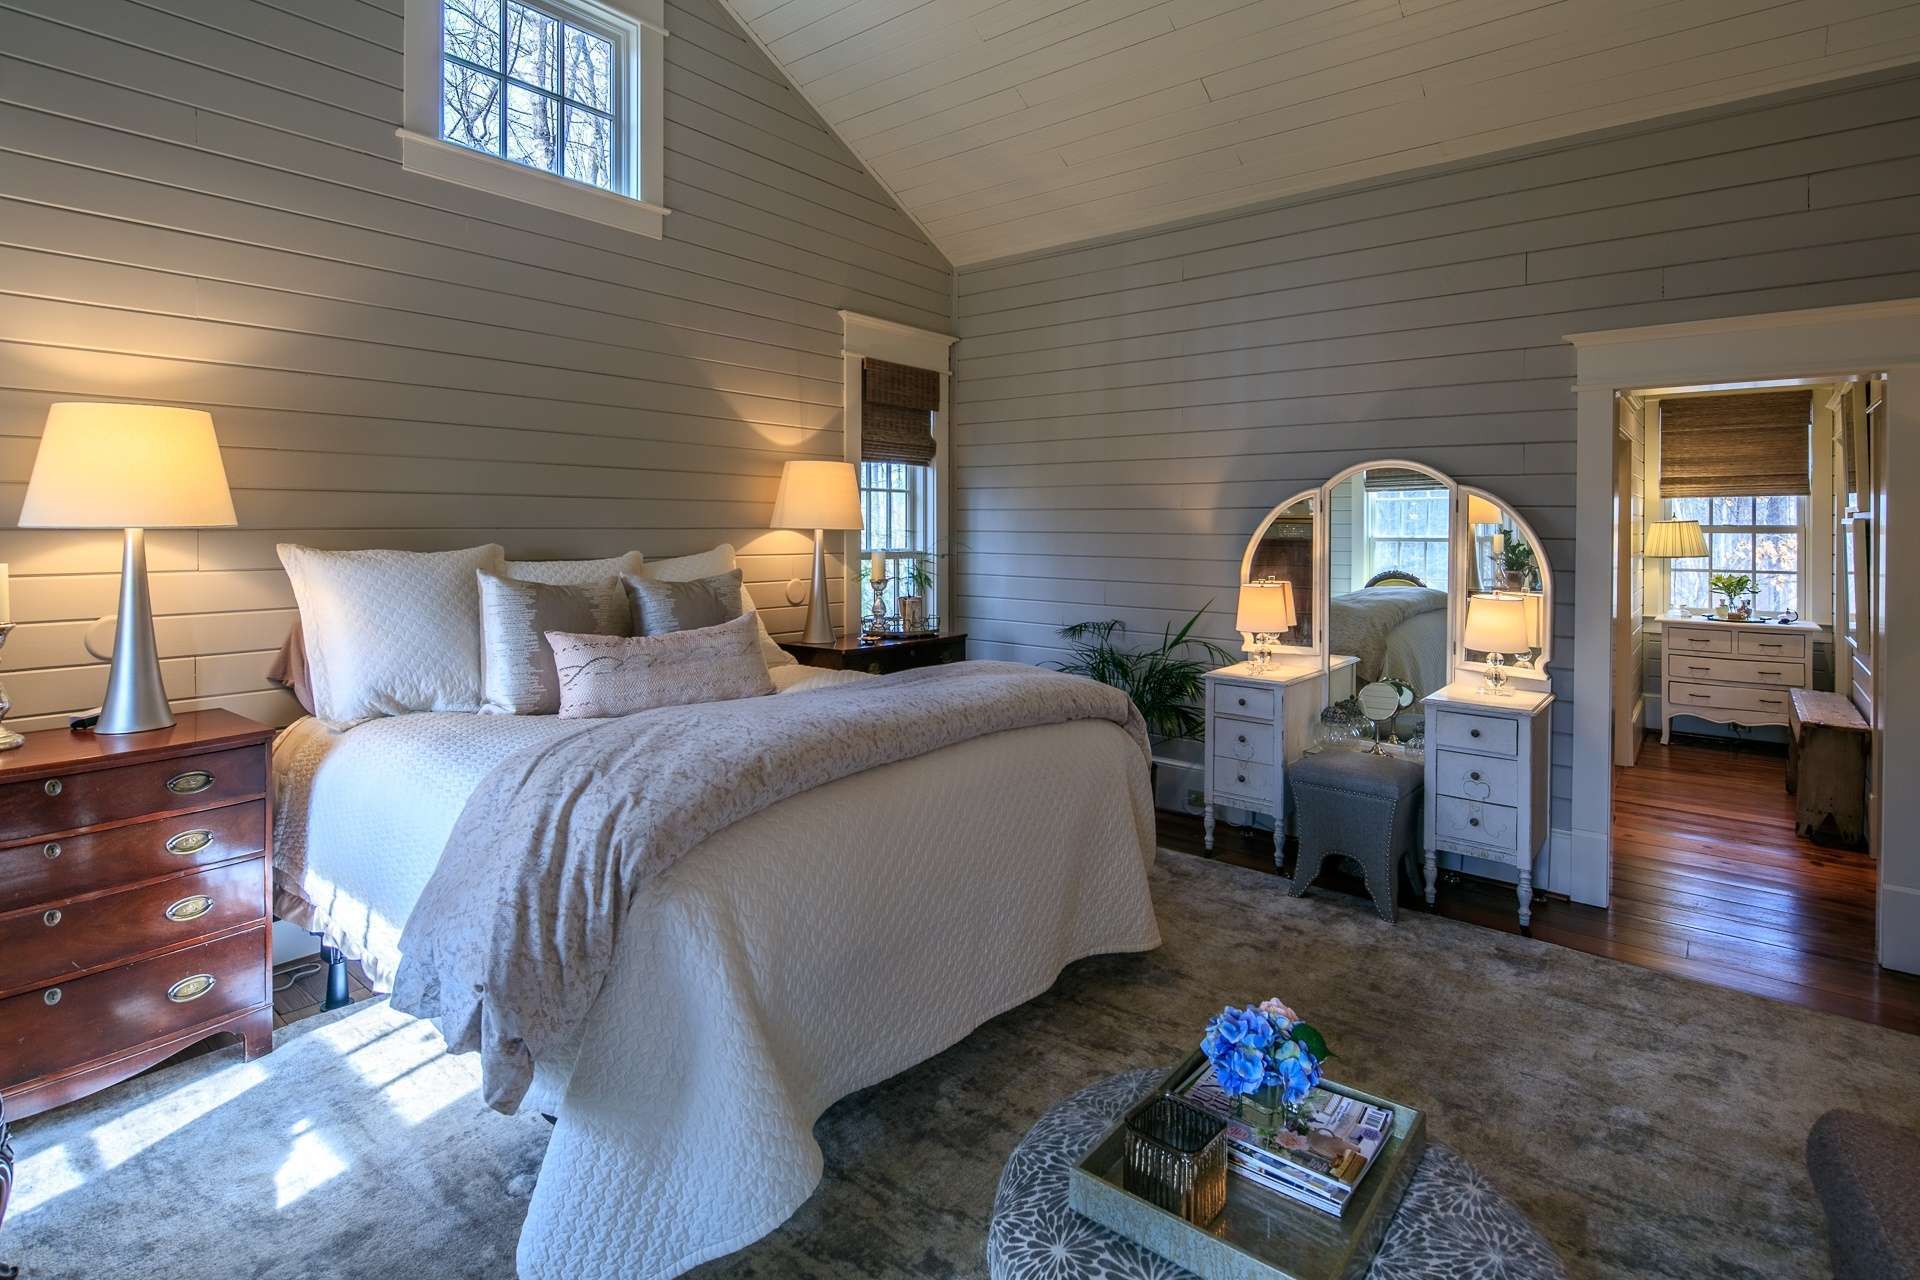 The master suite is truly a private retreat to relax at the end of the day after shopping in downtown West Jefferson, or enjoying a day on the nearby New River.